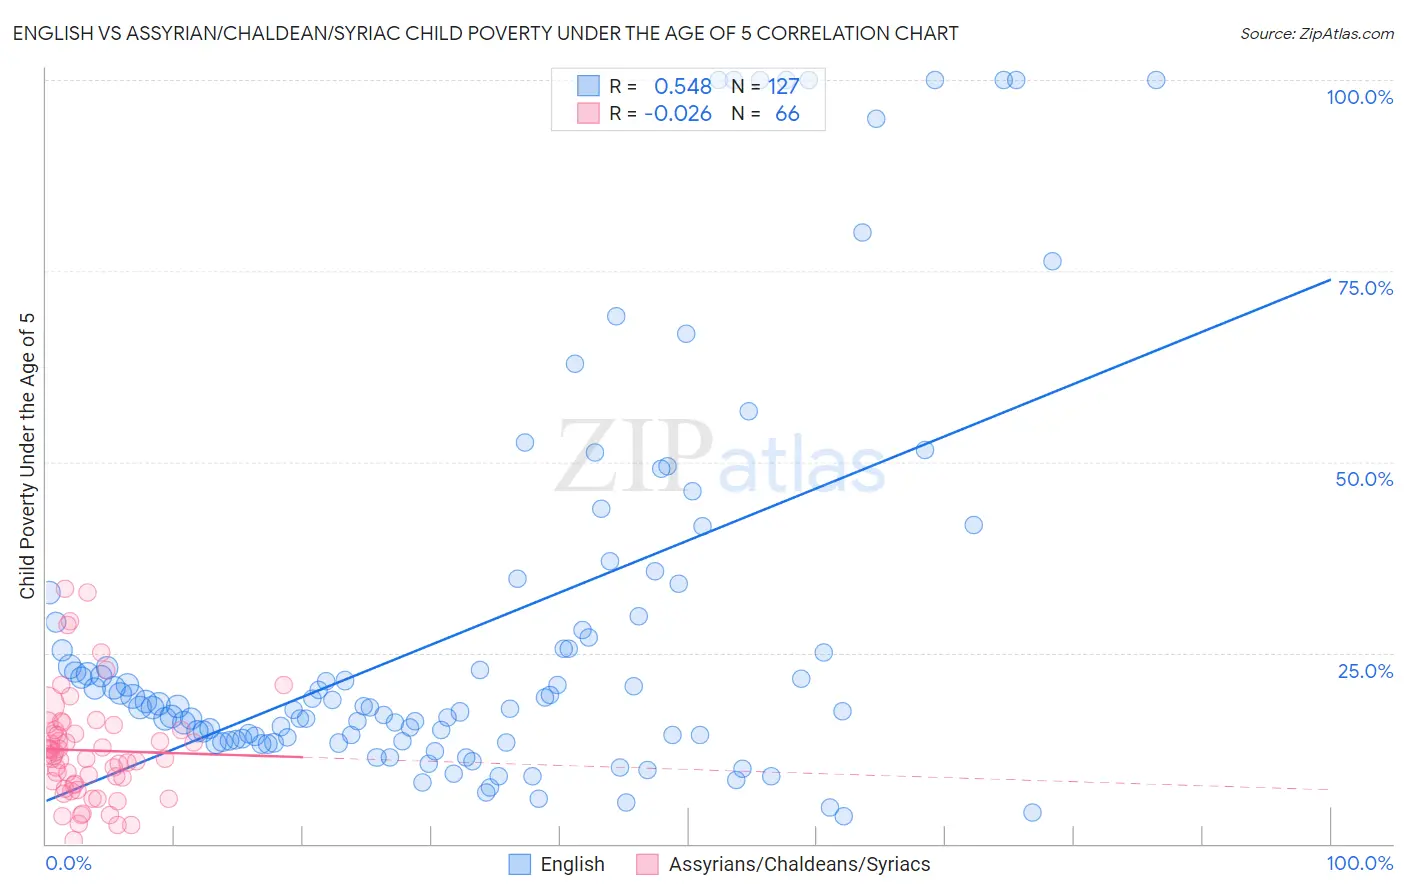 English vs Assyrian/Chaldean/Syriac Child Poverty Under the Age of 5